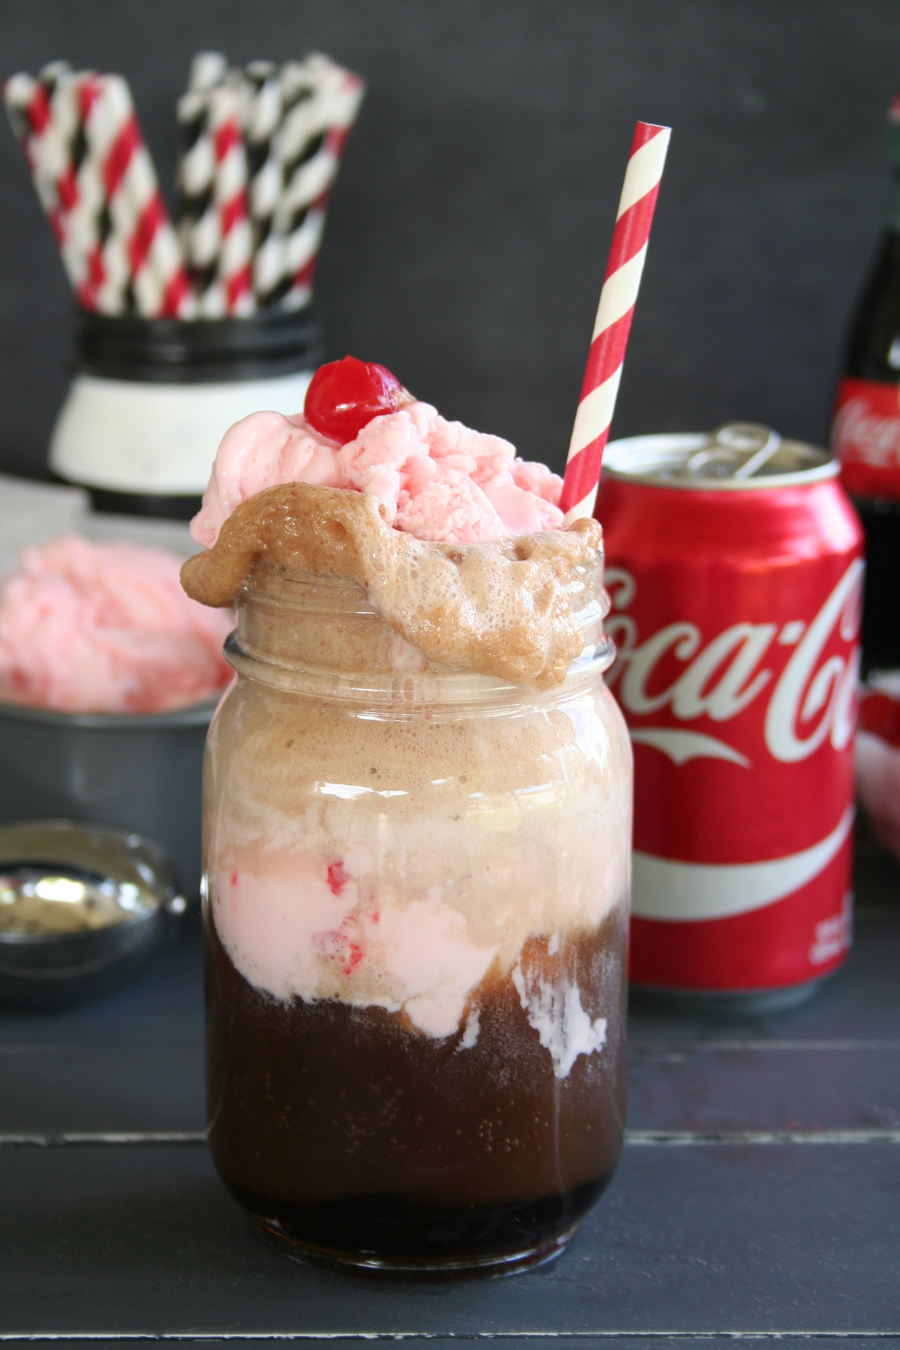 Everyone loves a float, this Cherry-Vanilla Coke Float is so good!